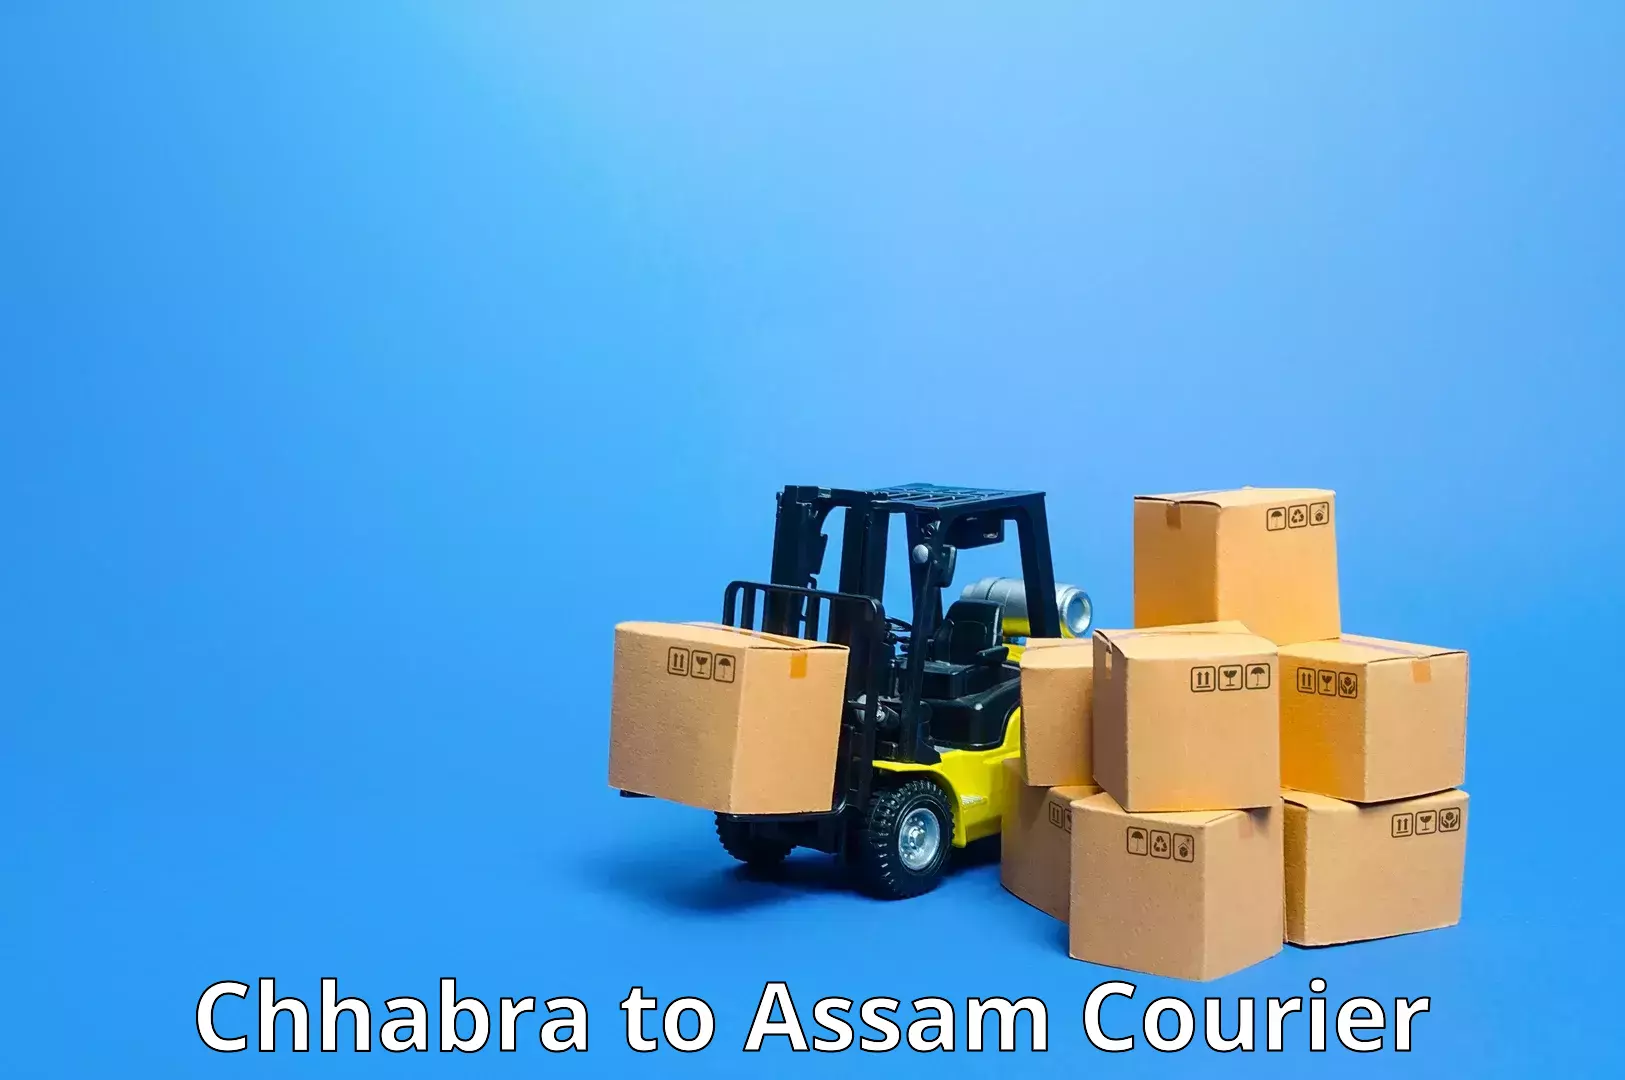 24/7 shipping services in Chhabra to Guwahati